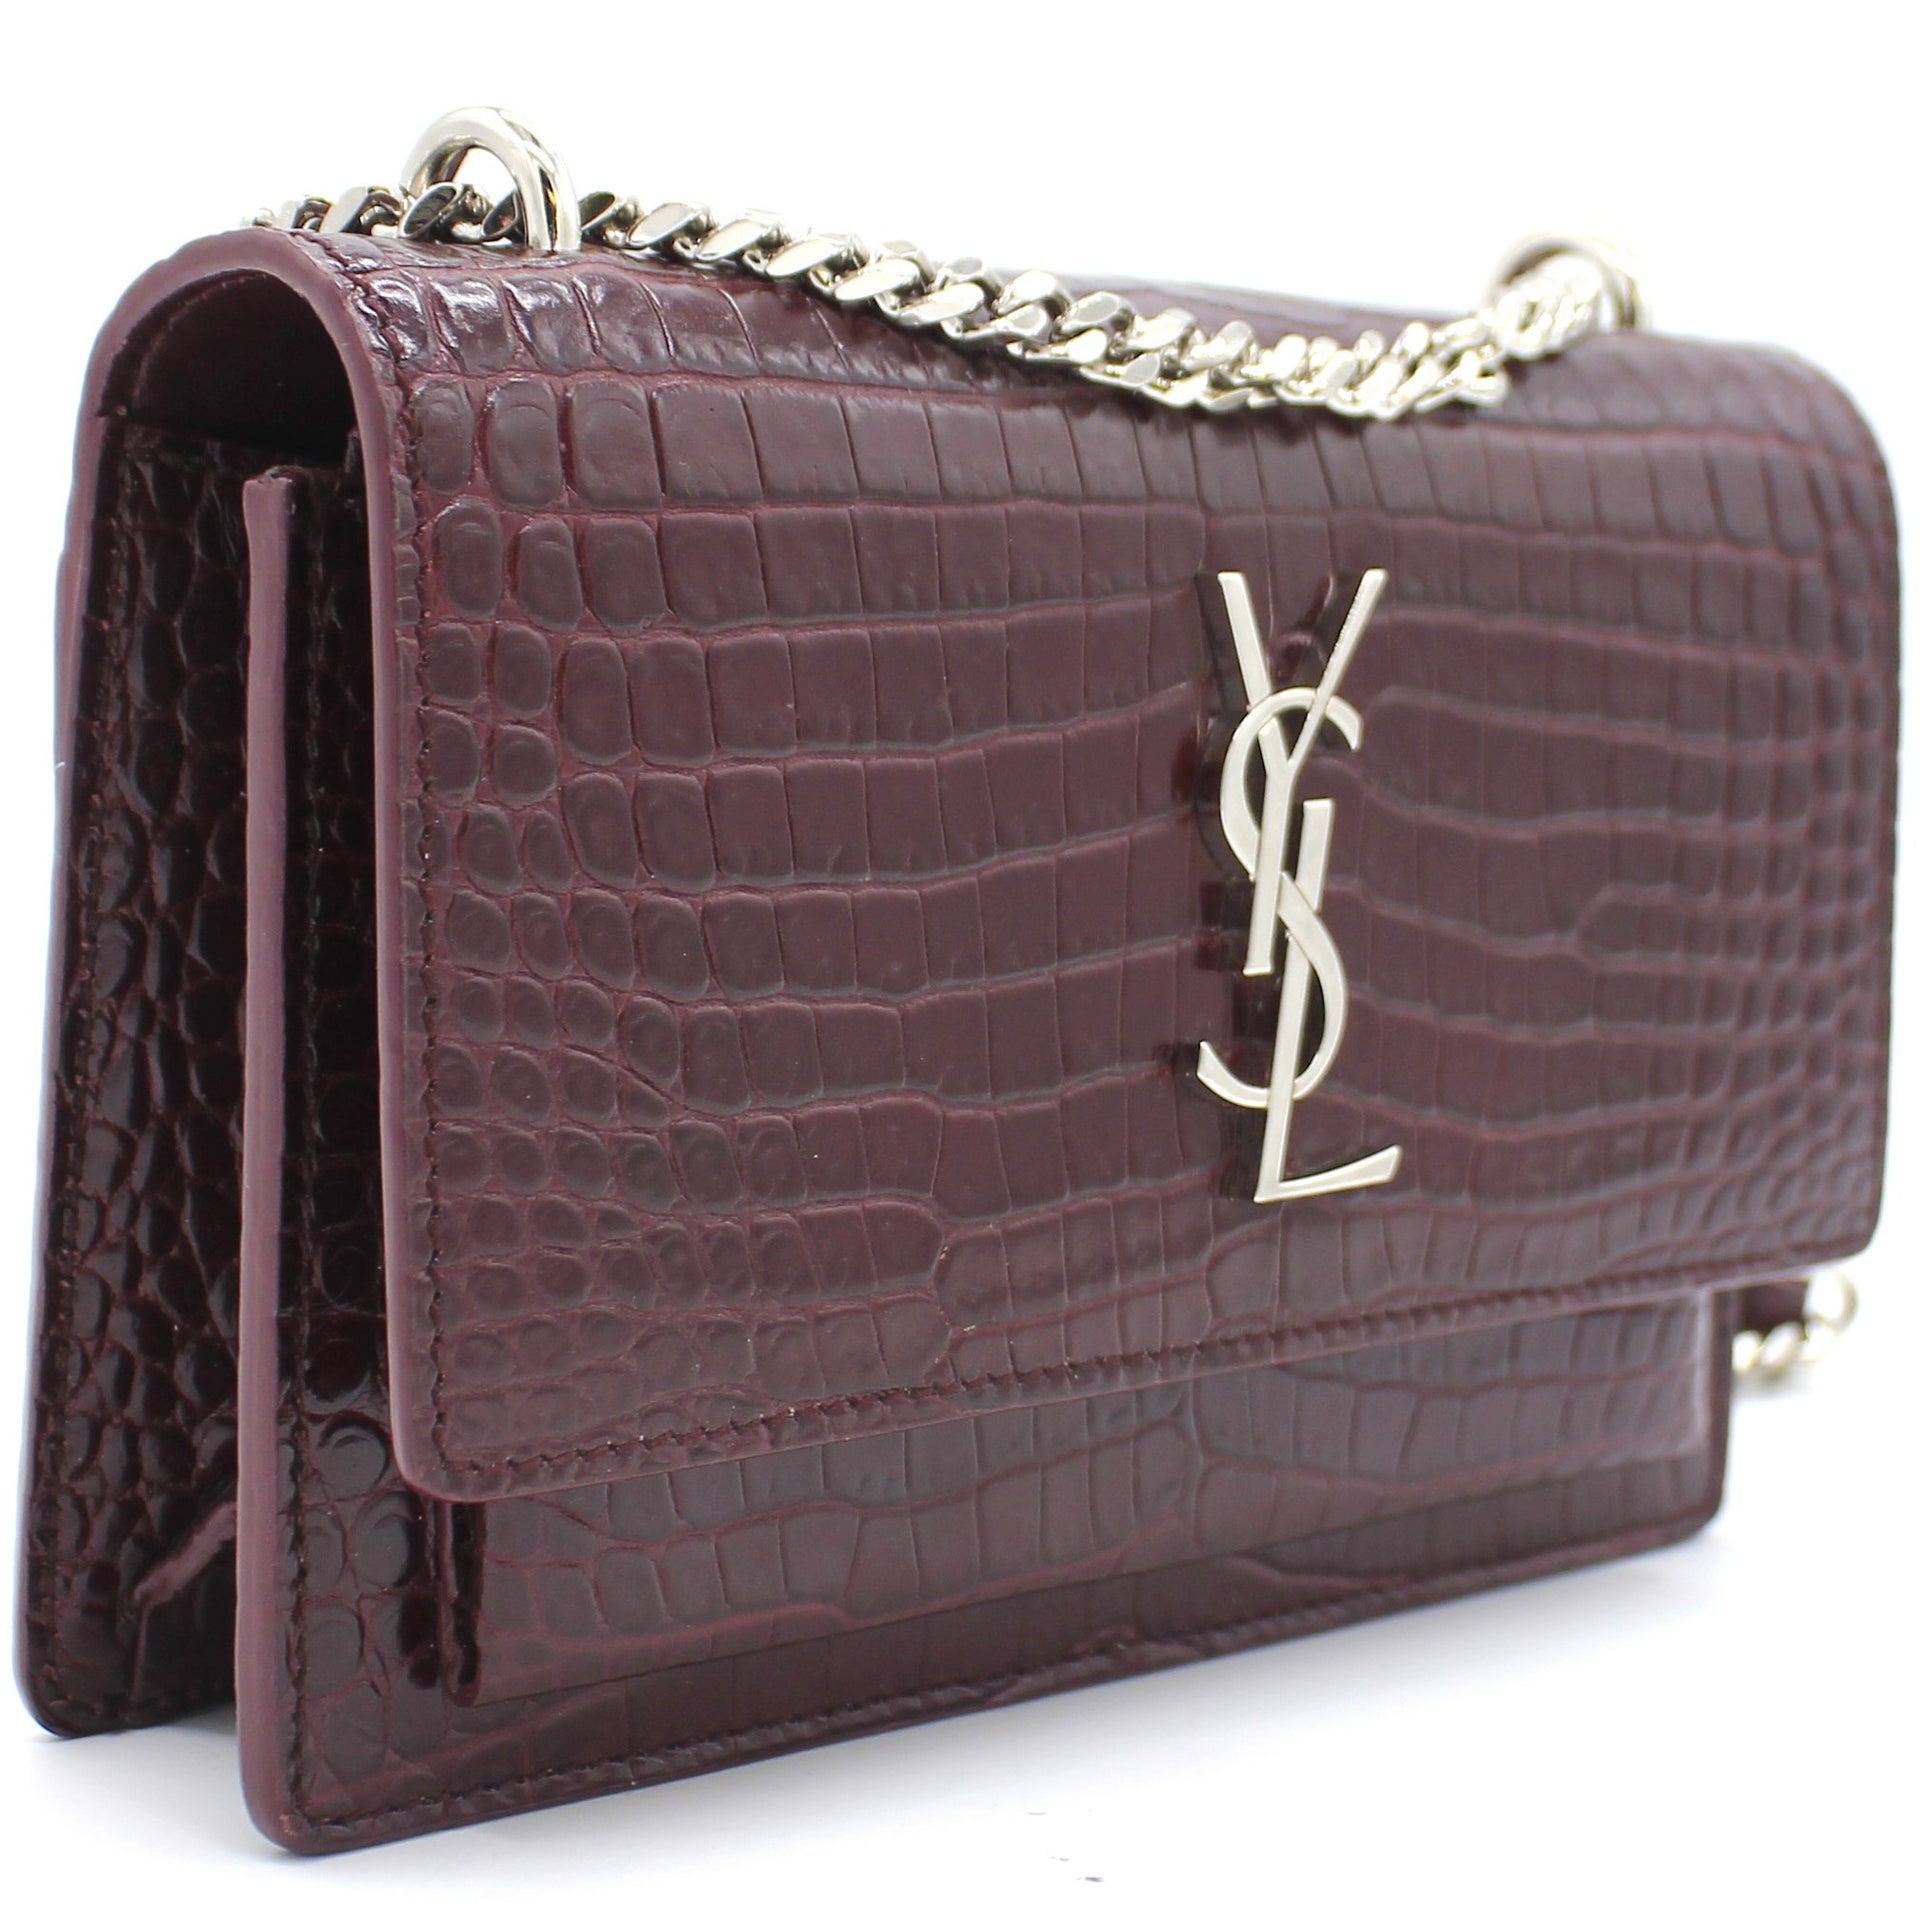 Sunset Monogram Leather Chain Wallet